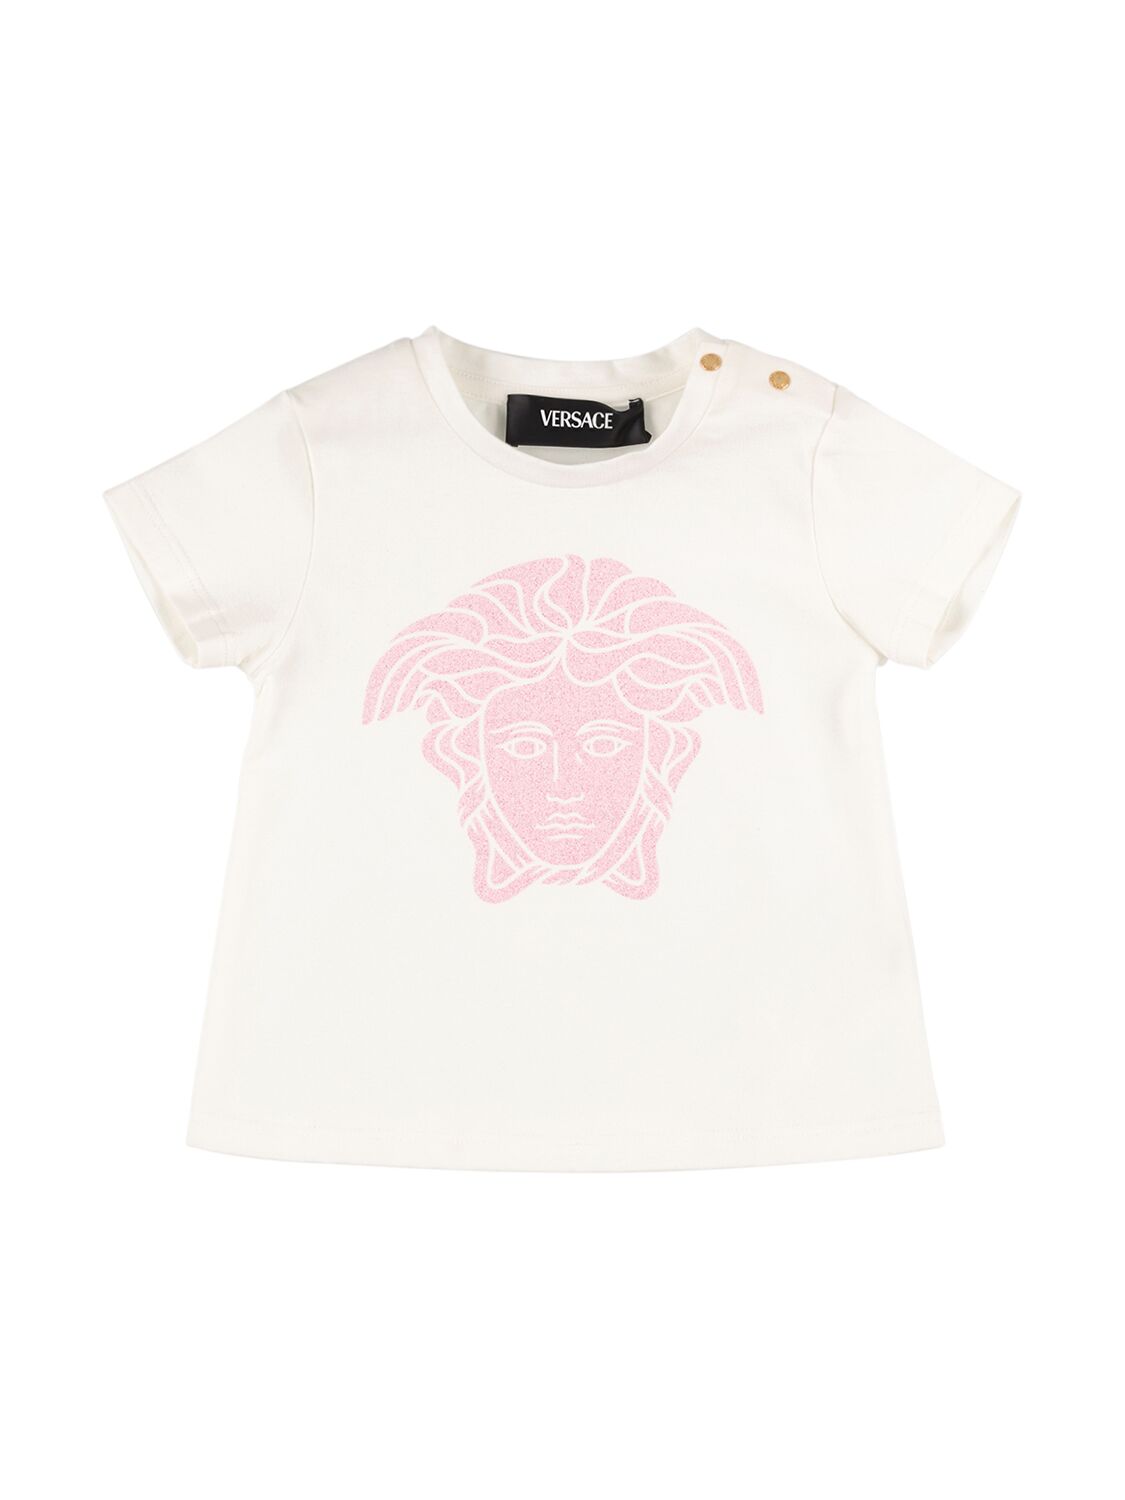 Versace Kids' Printed Cotton Jersey T-shirt In Pink